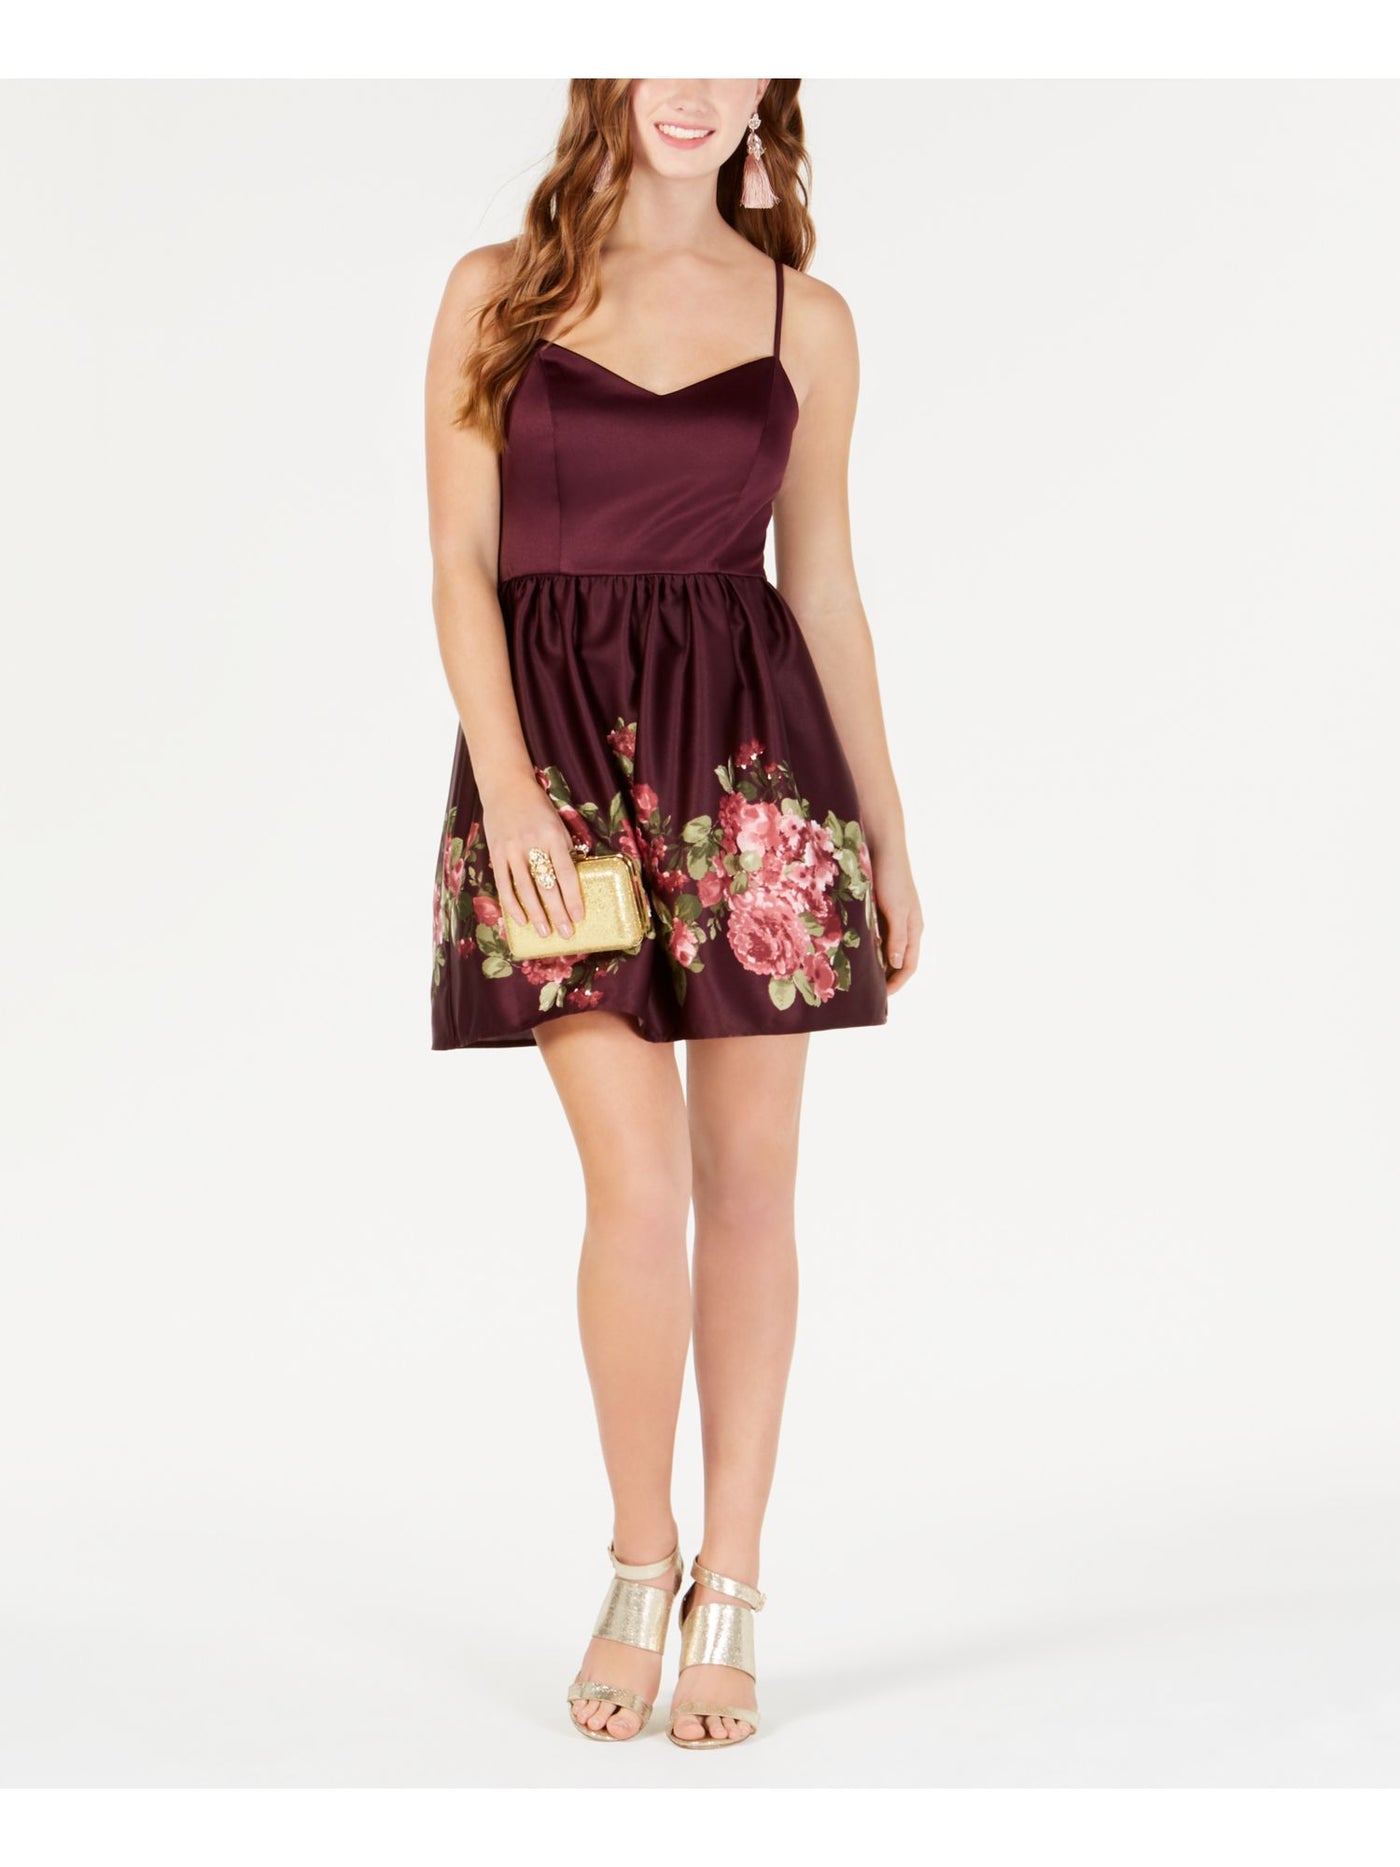 TEEZE ME Womens Burgundy Zippered Floral Spaghetti Strap Sweetheart Neckline Mini Cocktail Fit + Flare Dress Juniors 15\16